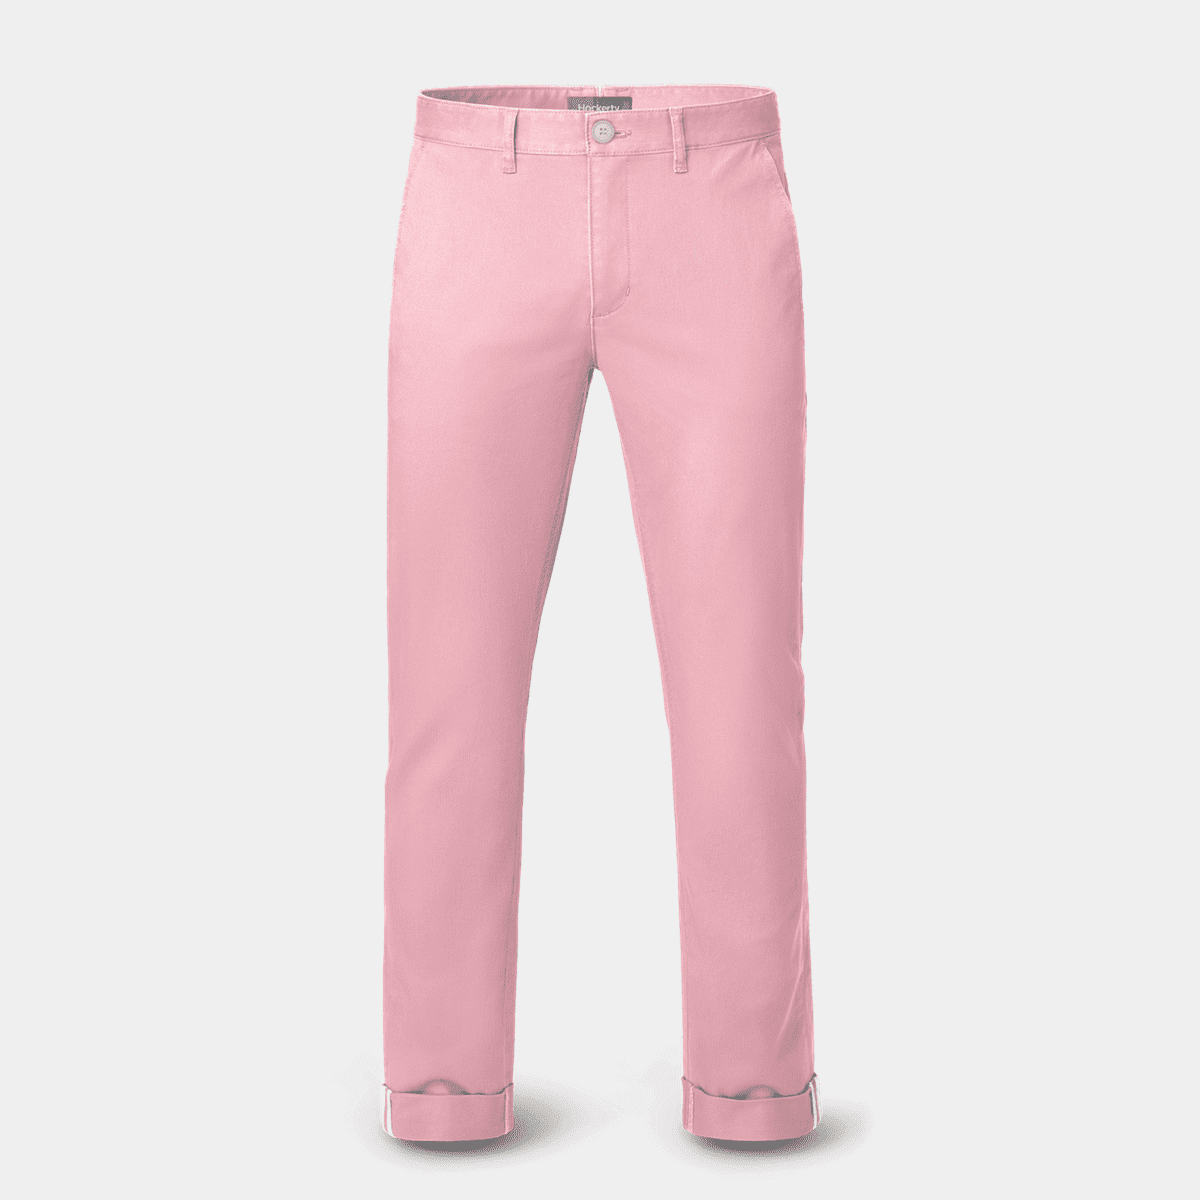 Light Pink rolled up Chino pants